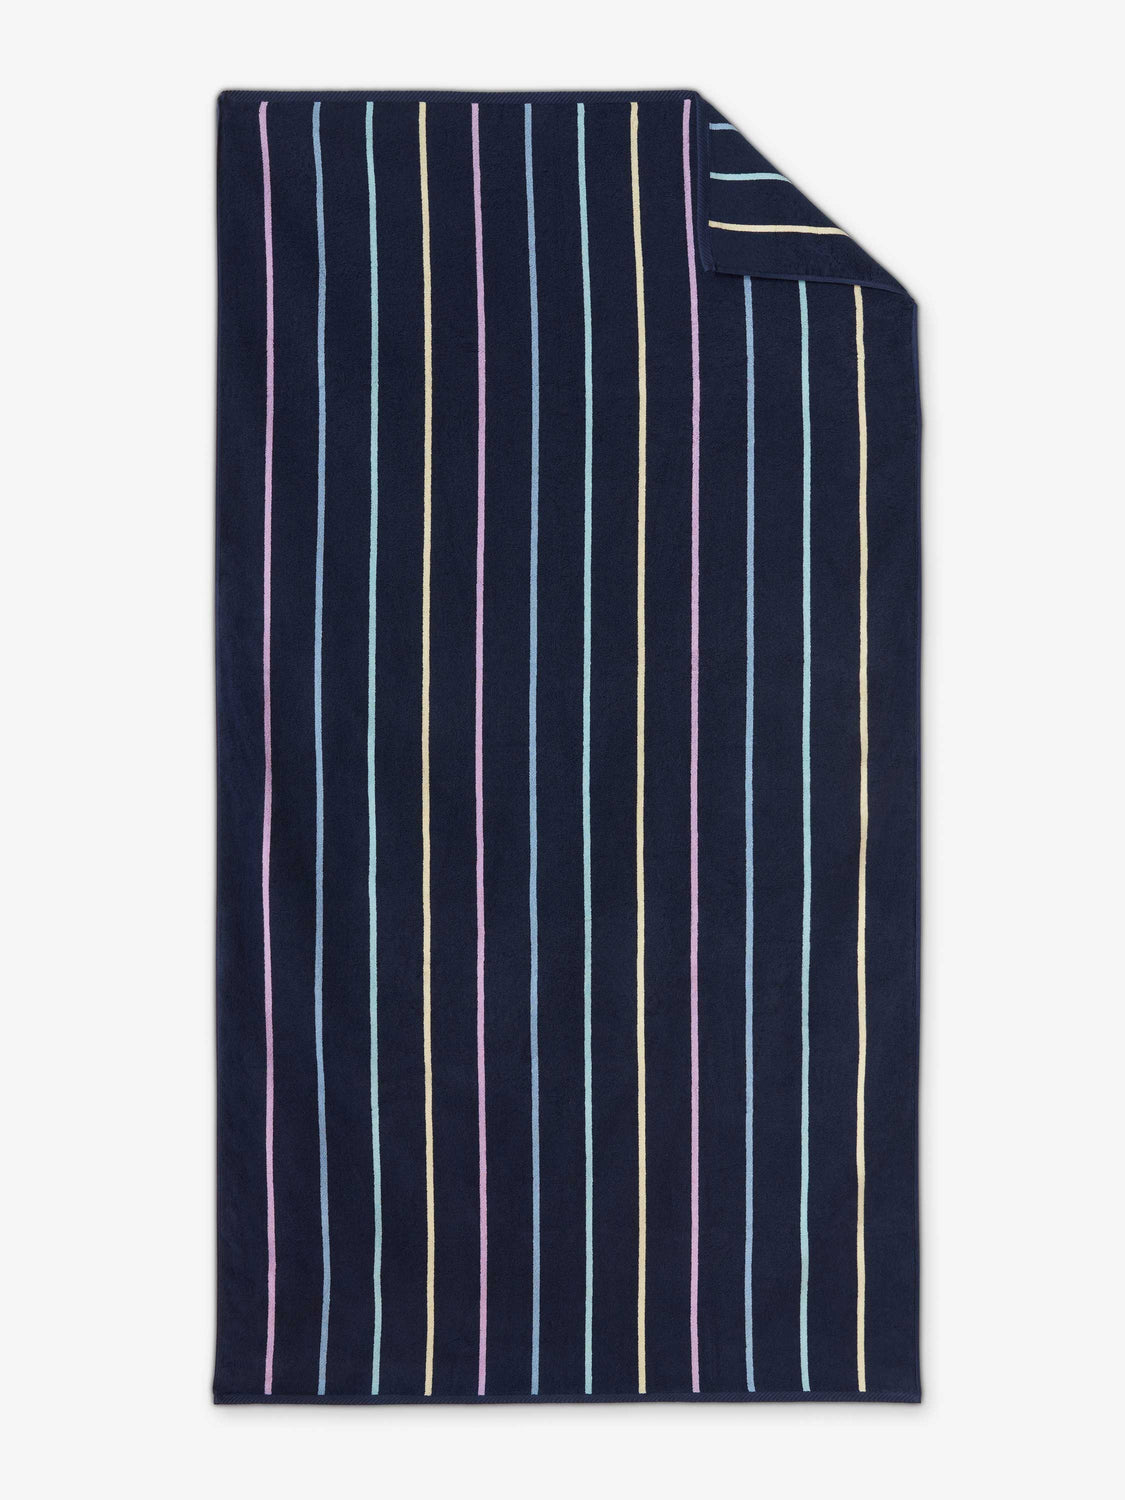 An oversized, navy blue and multicolor-striped cabana beach towel laid out.